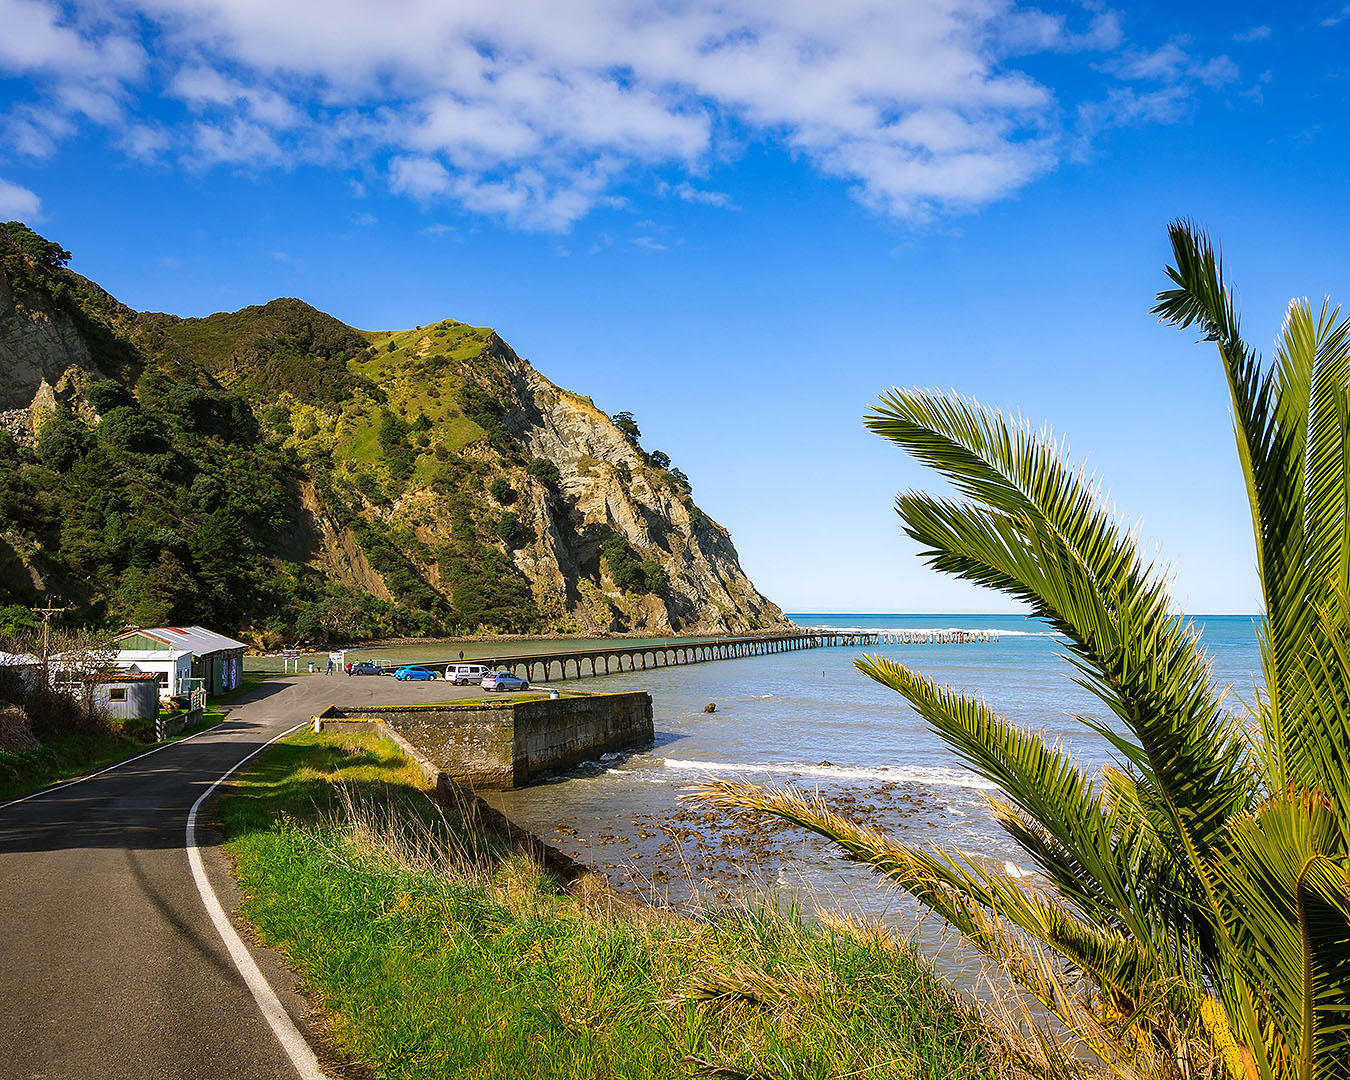 The famous wharf at Tokomaru Bay, one of the best spots for free camping in NZ.